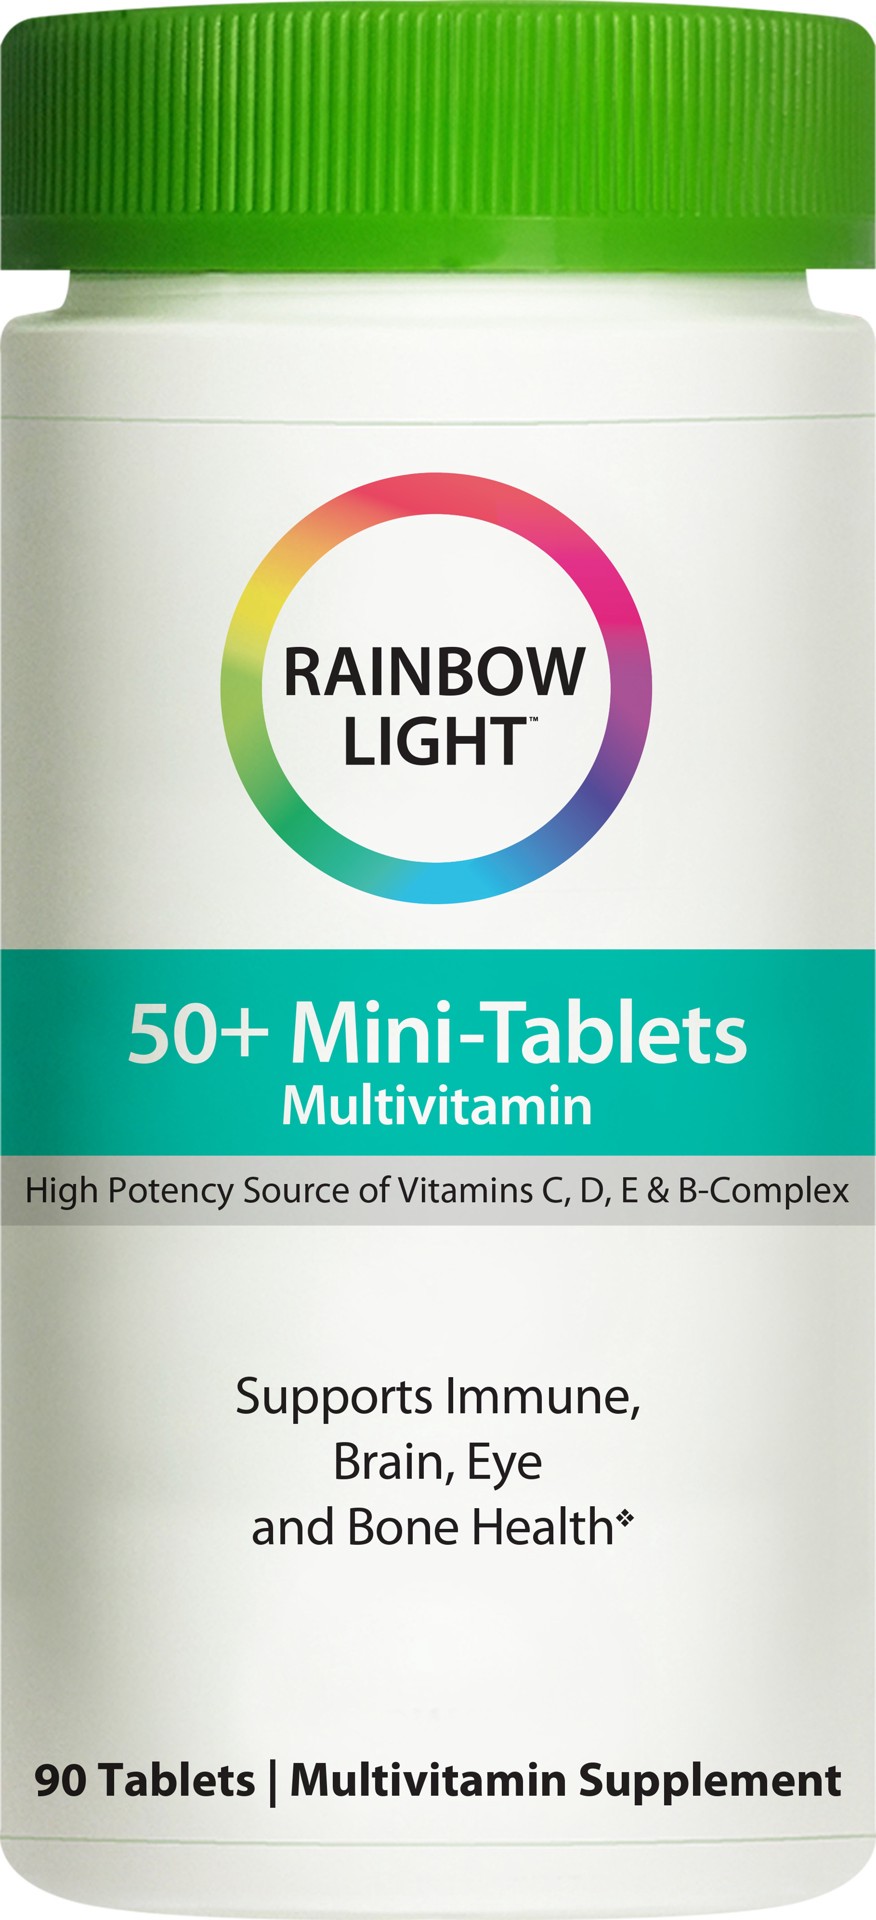 slide 1 of 7, Rainbow Light 50+ Mini Tablets Multivitamin for Adults, Supports Immune, Brain, Eye and Bone Health, 90 Count, 1 Bottle, 90 ct